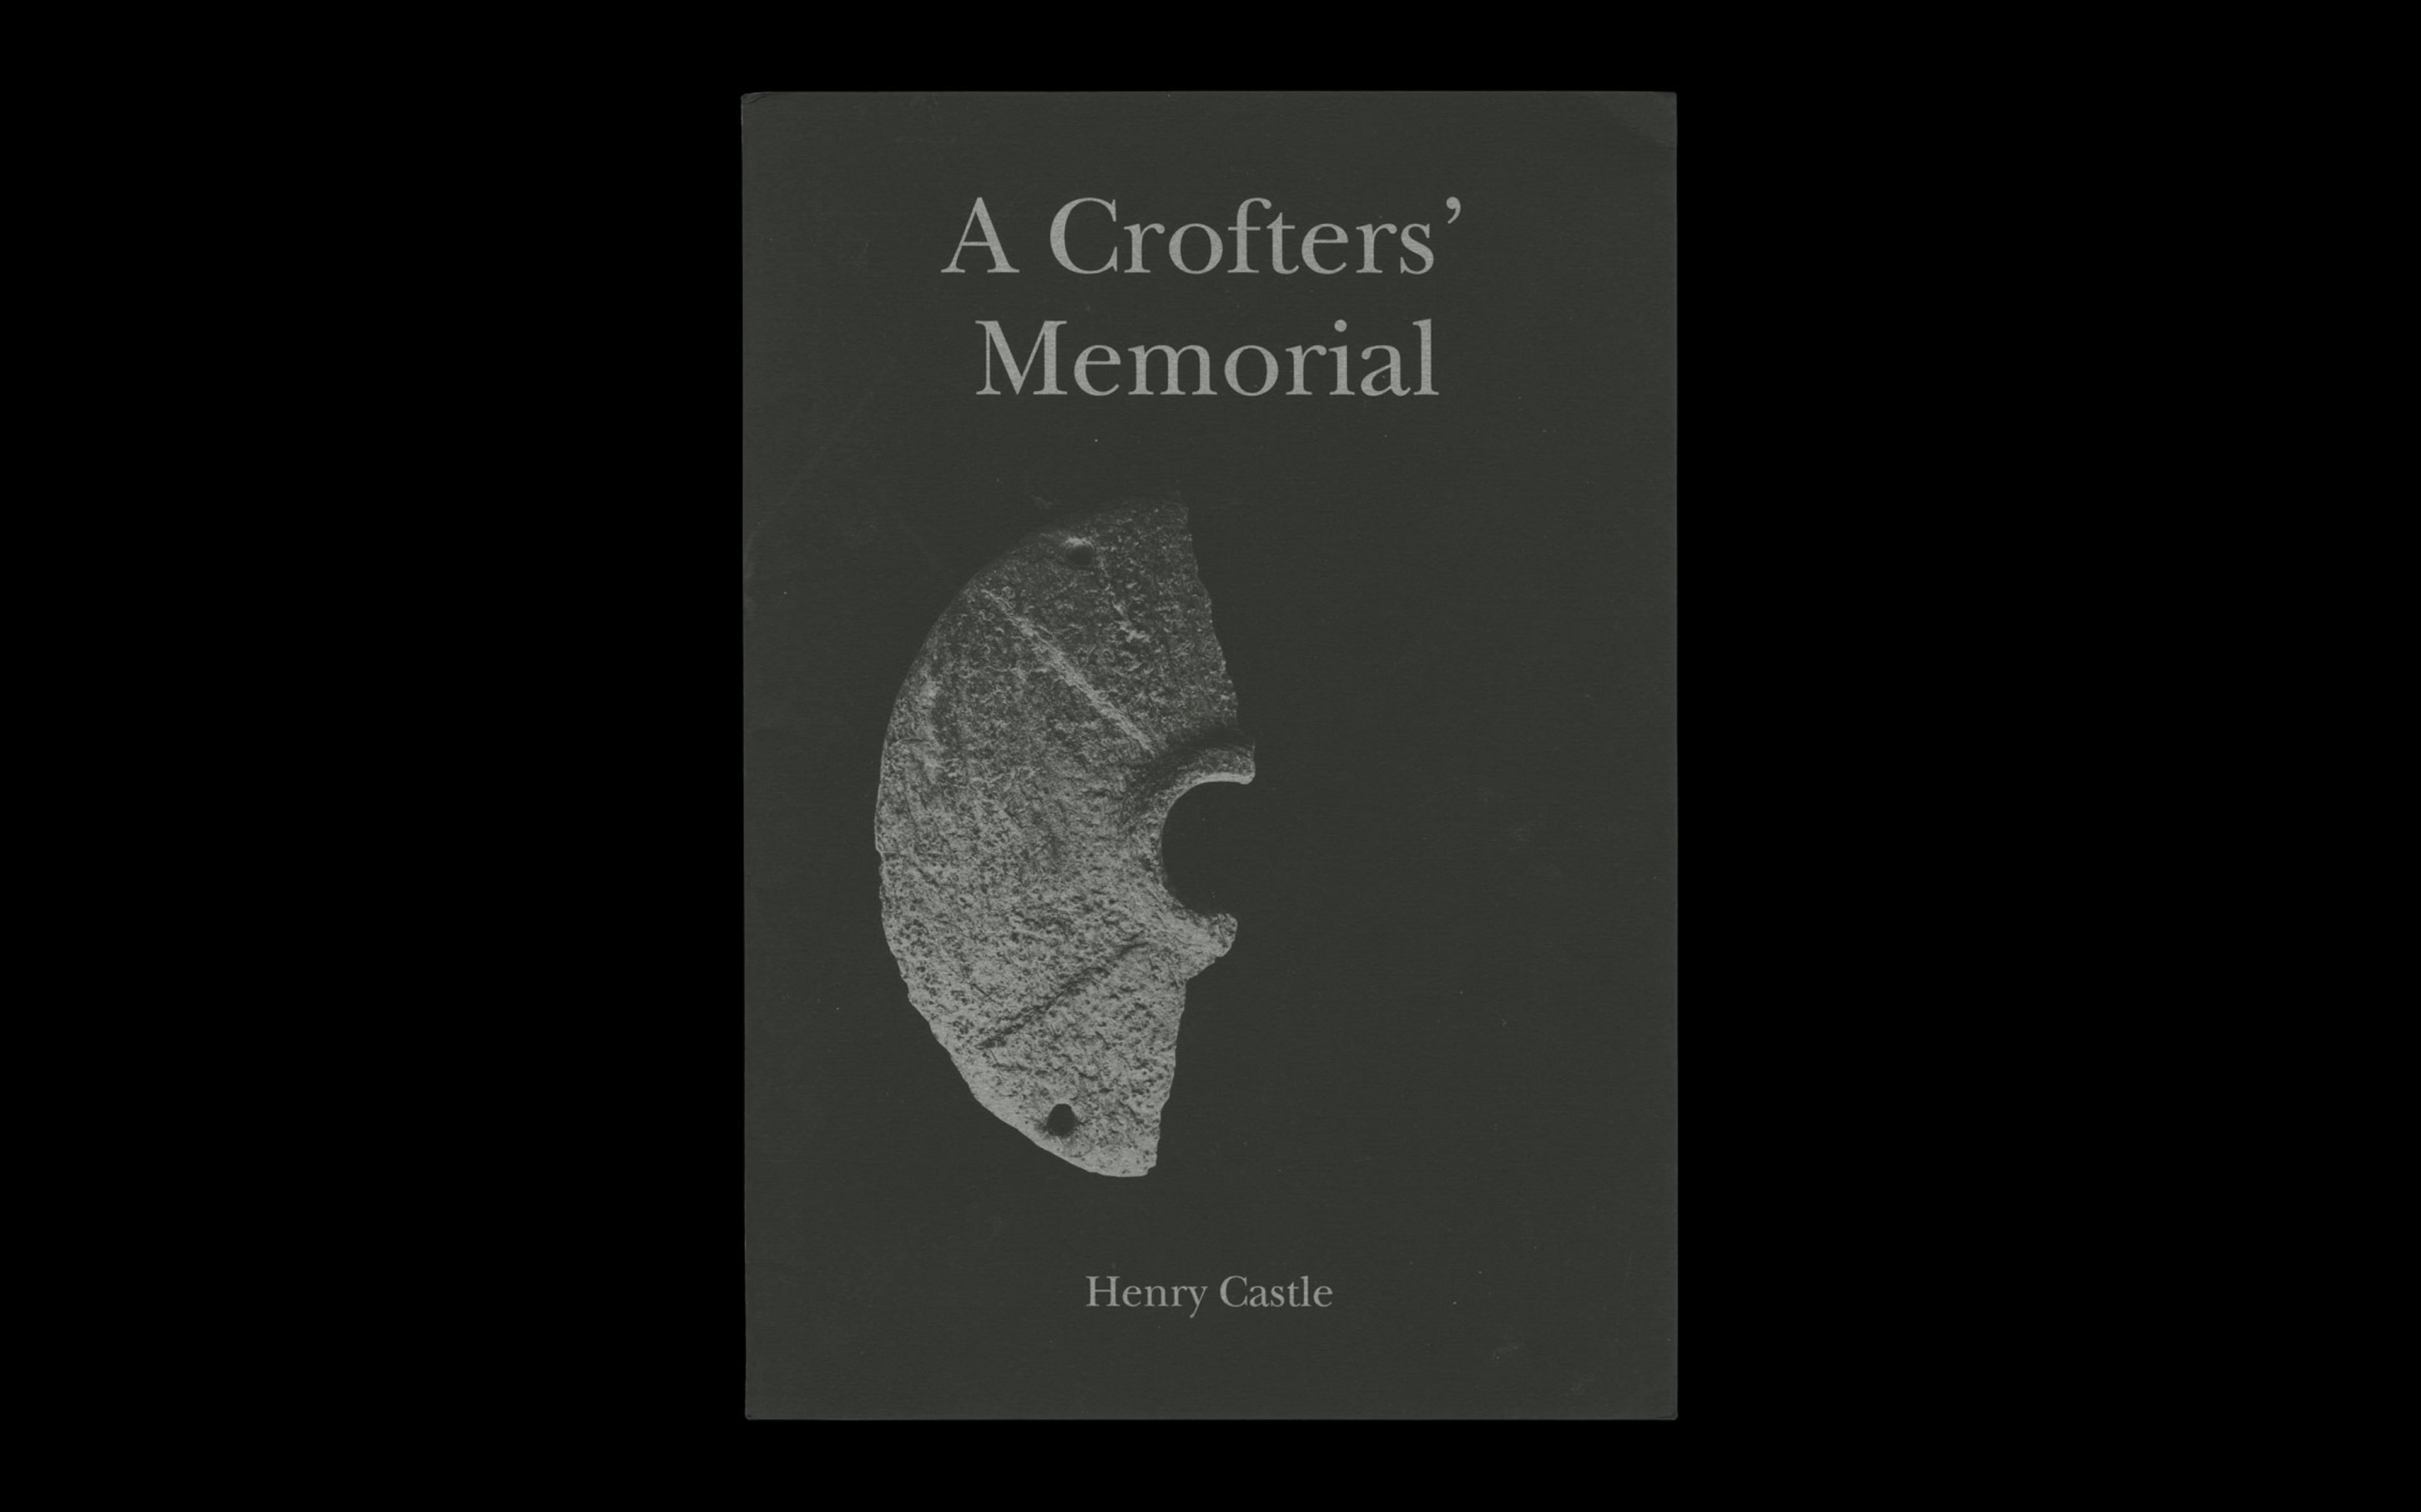 Scan of cover of Henry Castle, A Crofter's Memorial. Brochure with silver ink printed on black cover stock.